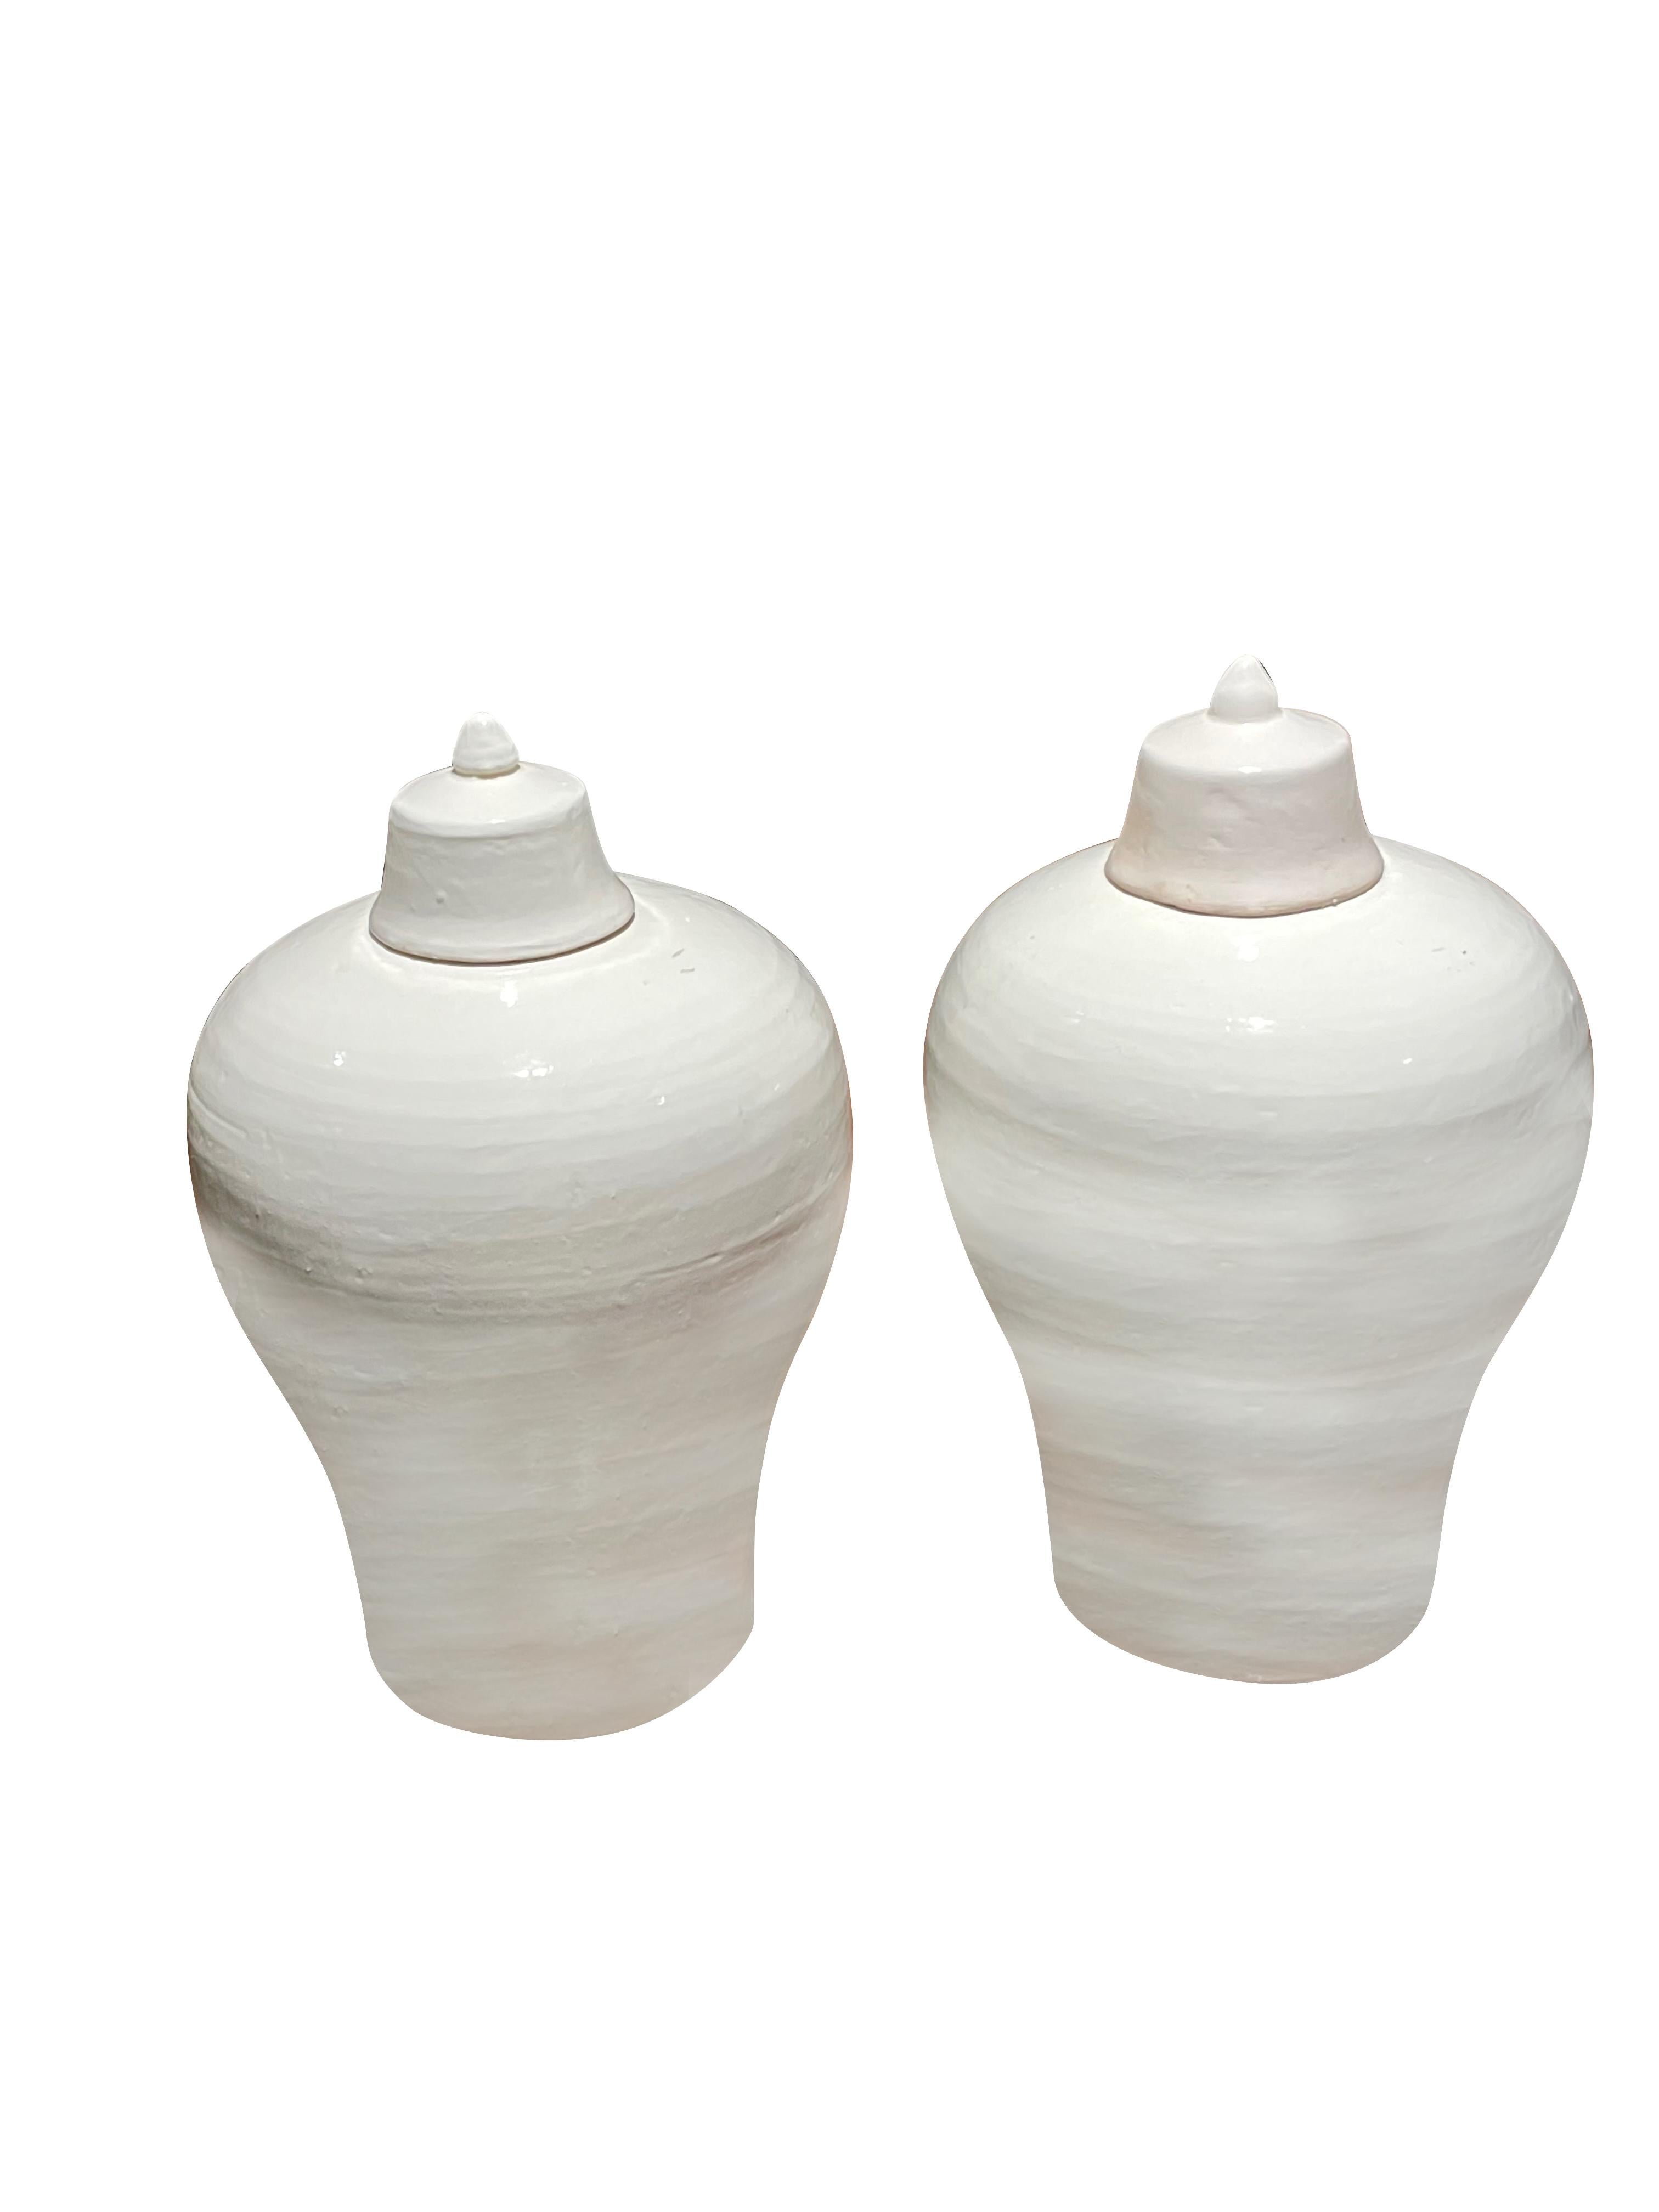 Contemporary Chinese lidded cream vase.
Ginger jar shape.
Two available and sold individually.